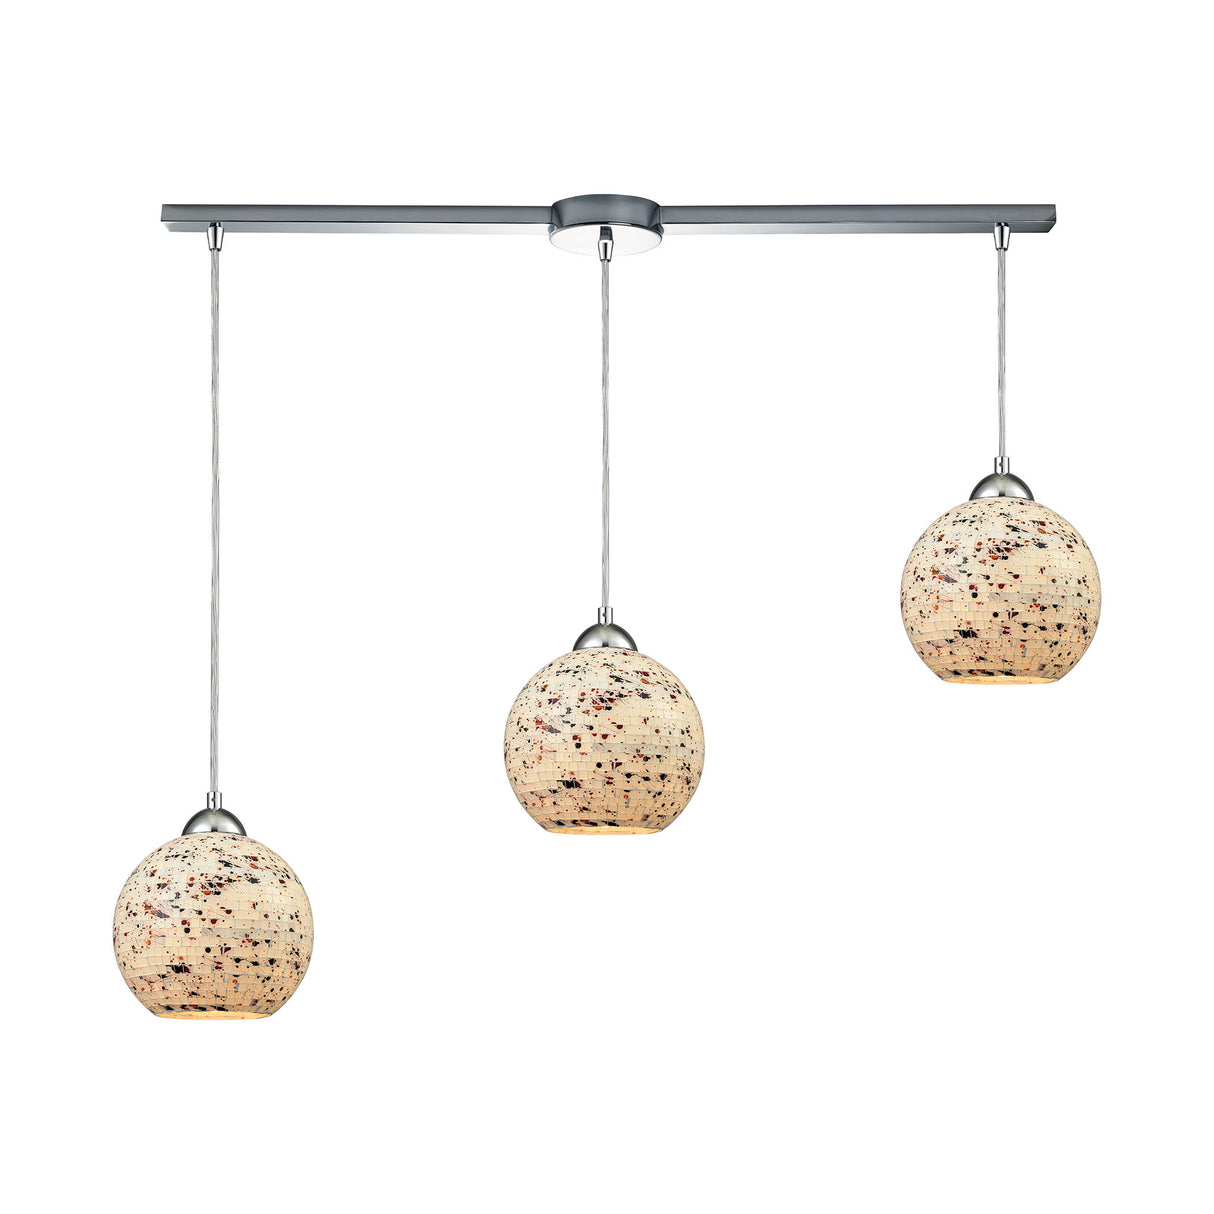 Elk 10741/3L Spatter 3-Light Linear Mini Pendant Fixture in Polished Chrome with Spatter Mosaic Glass